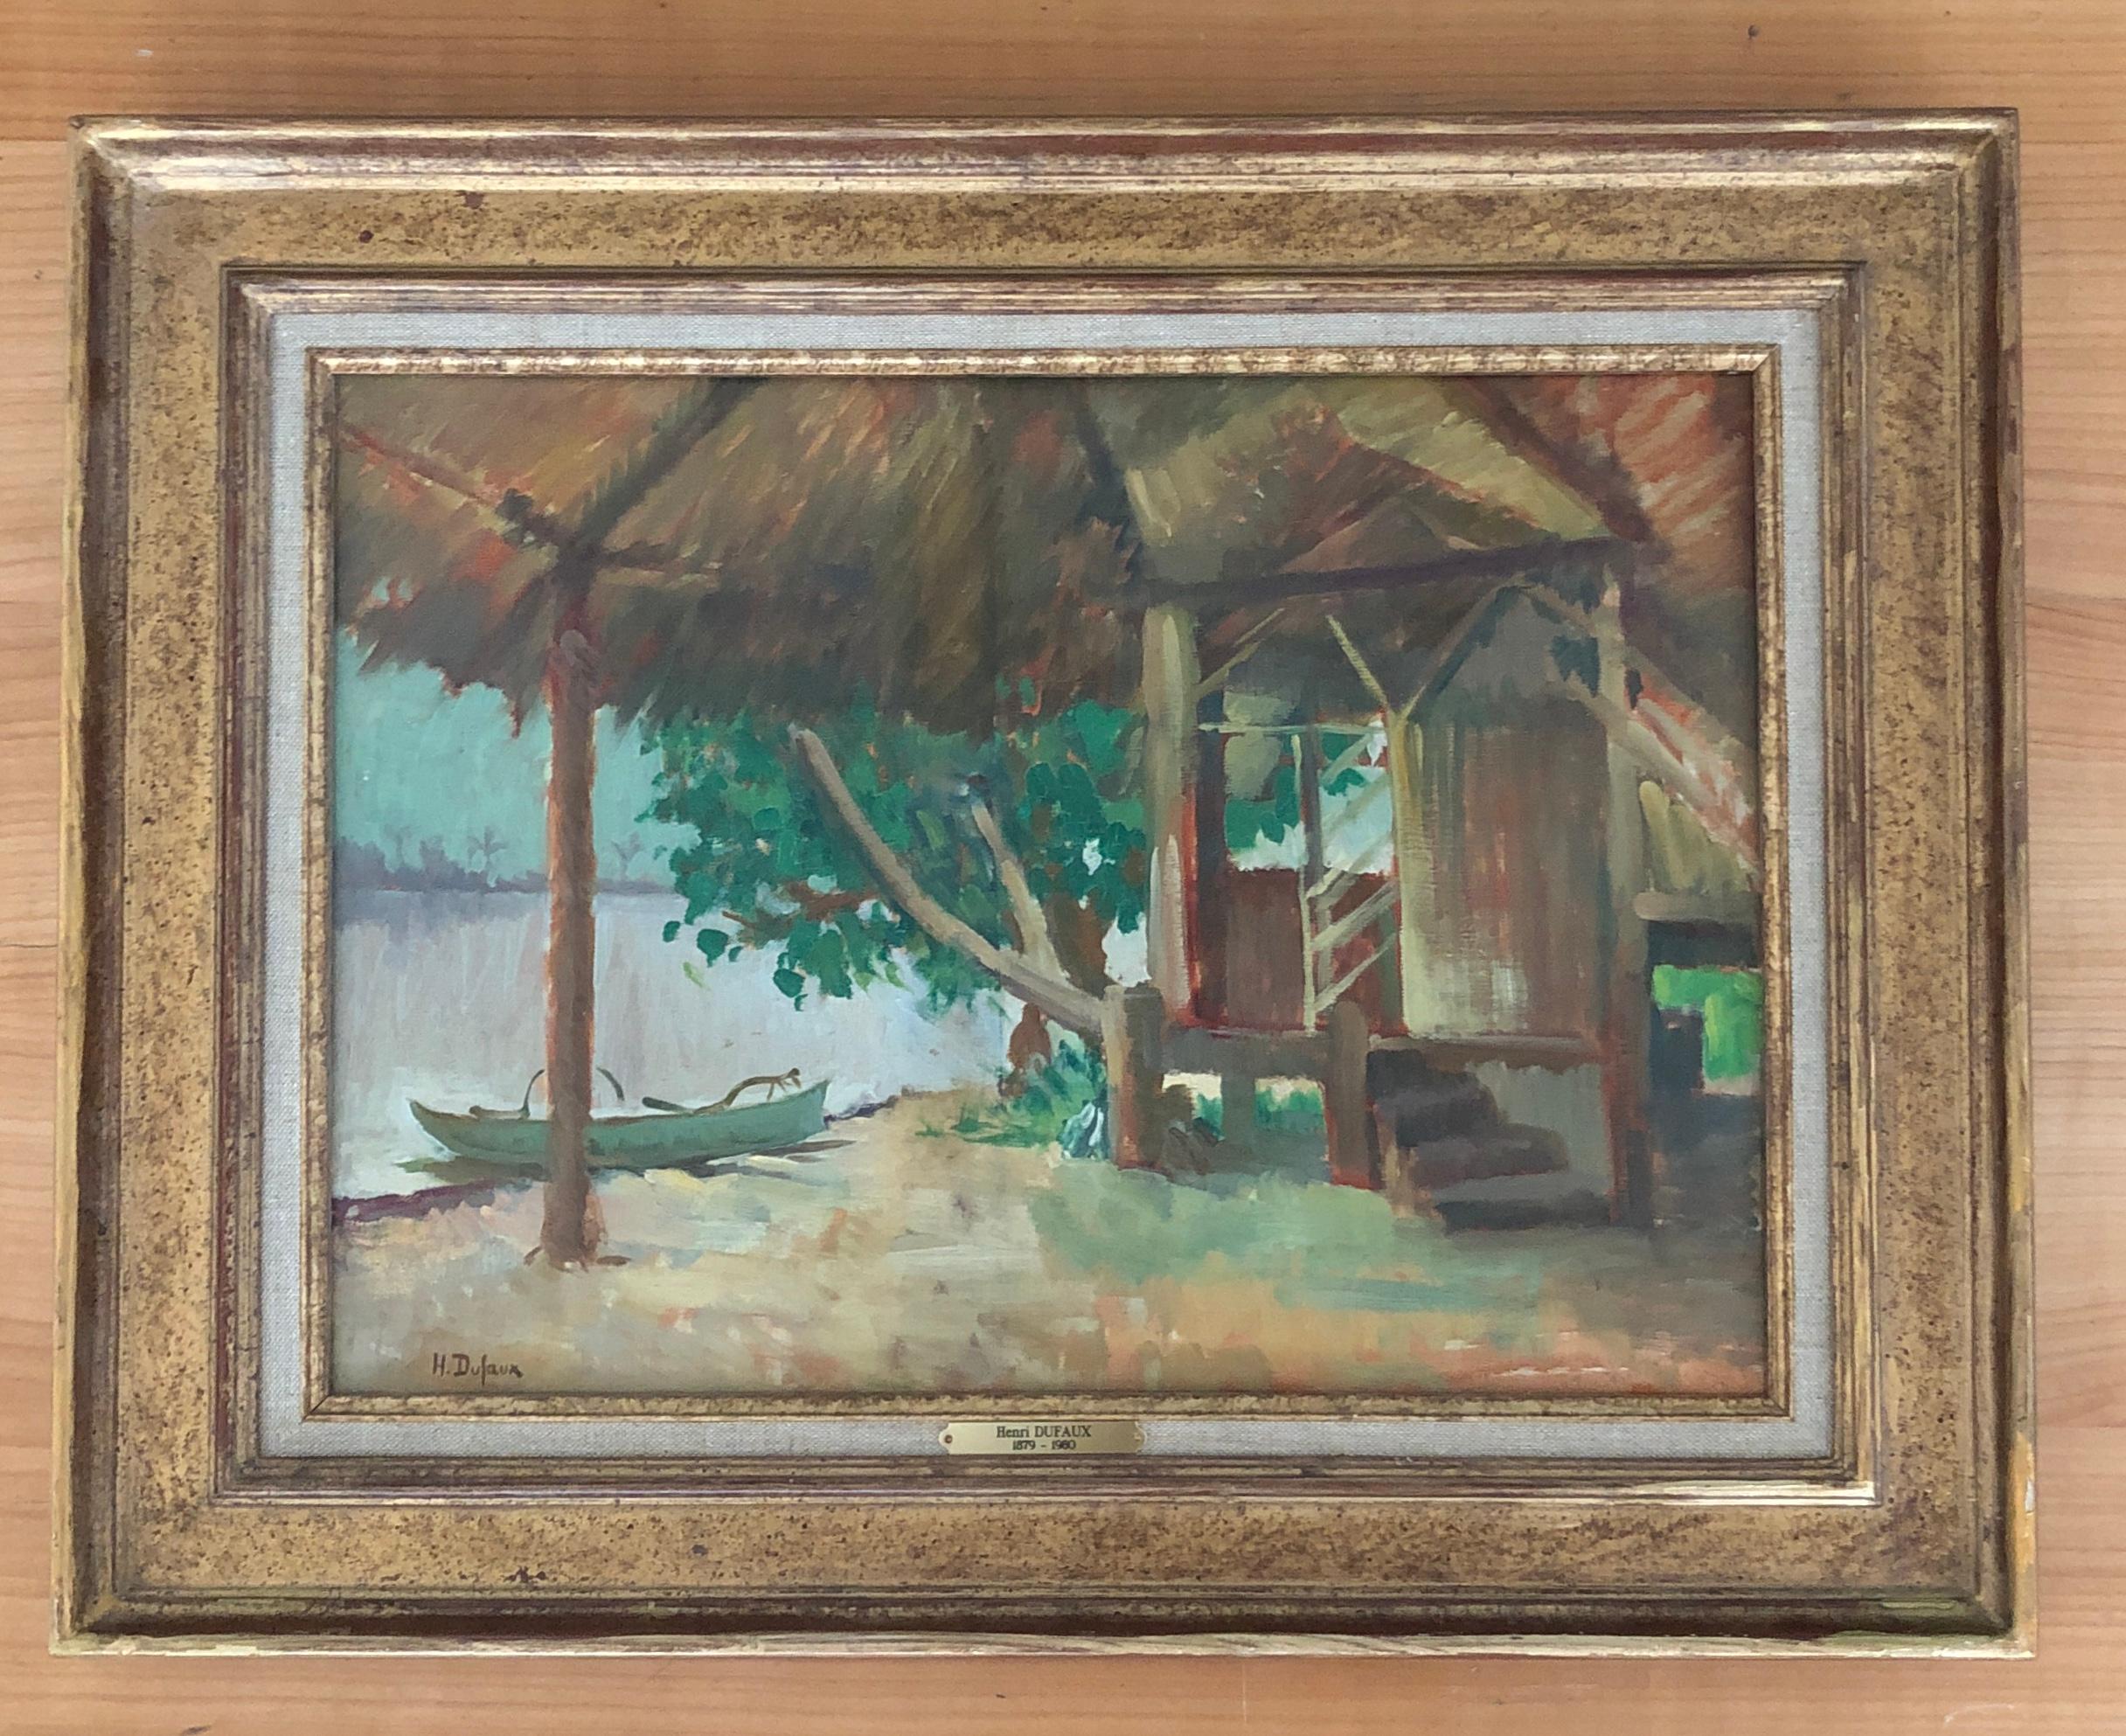 By the lagoon in Moorea - Painting by Henri Dufaux